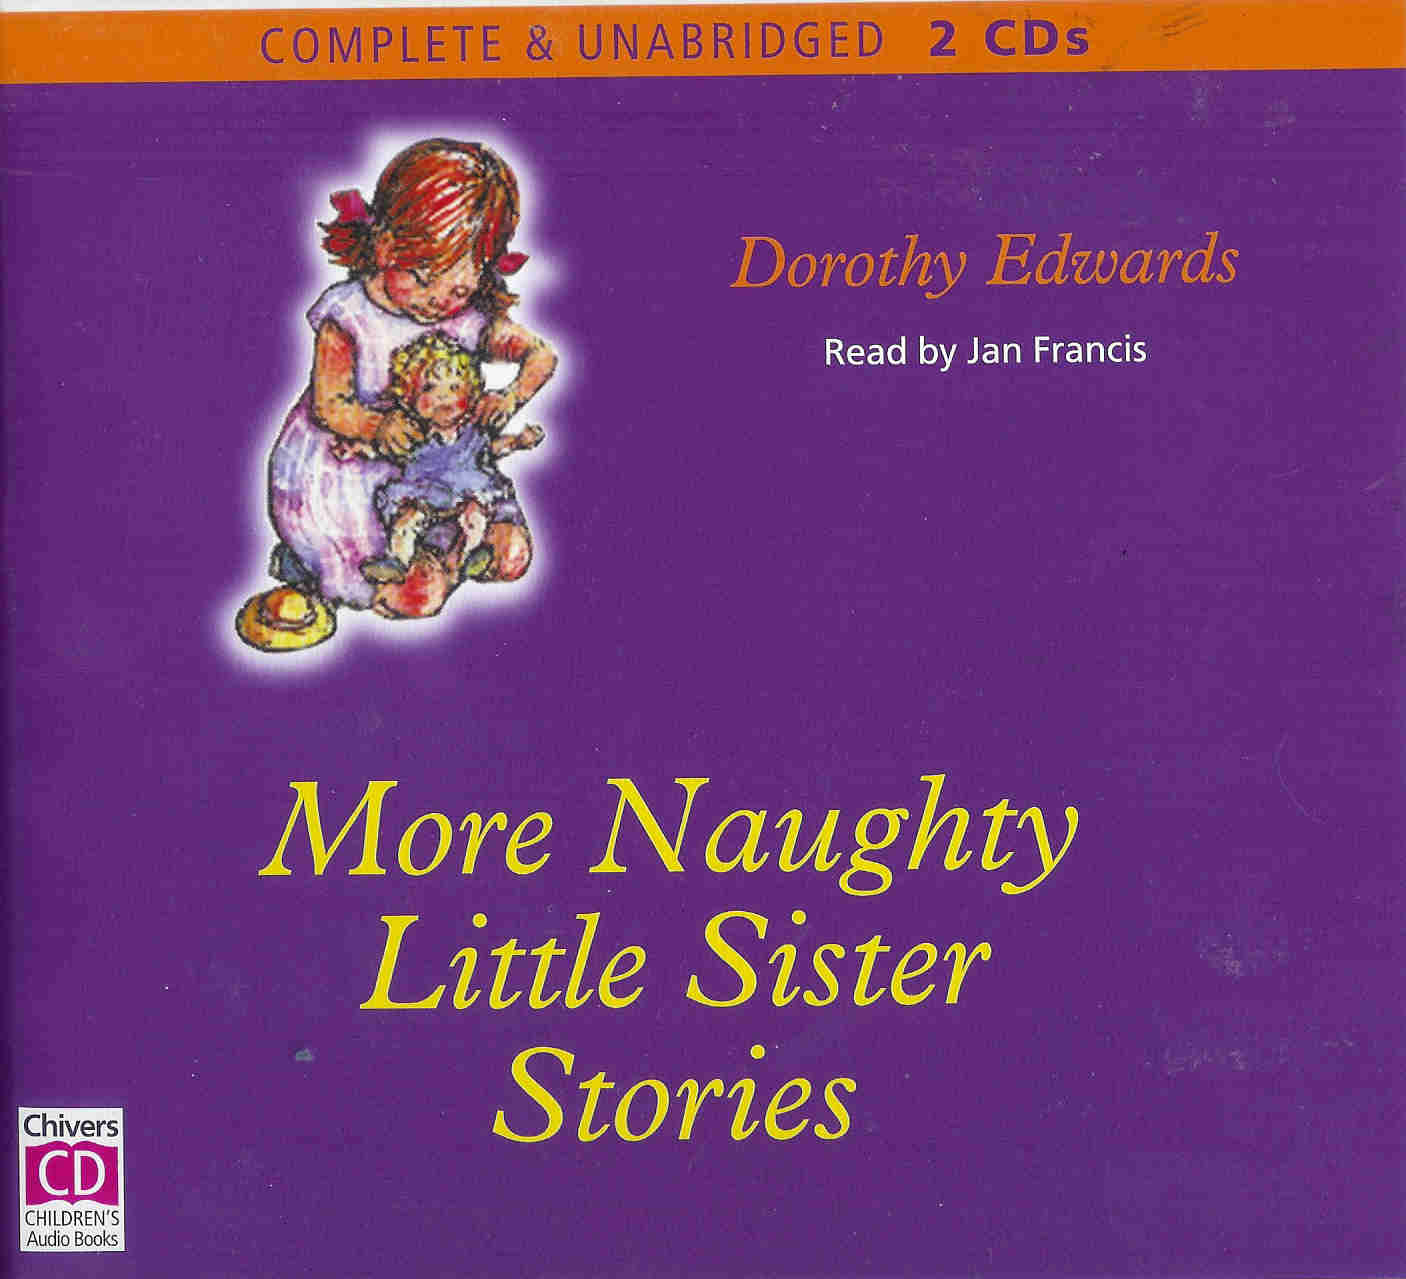 More Naughty Little Sister Stories Audio